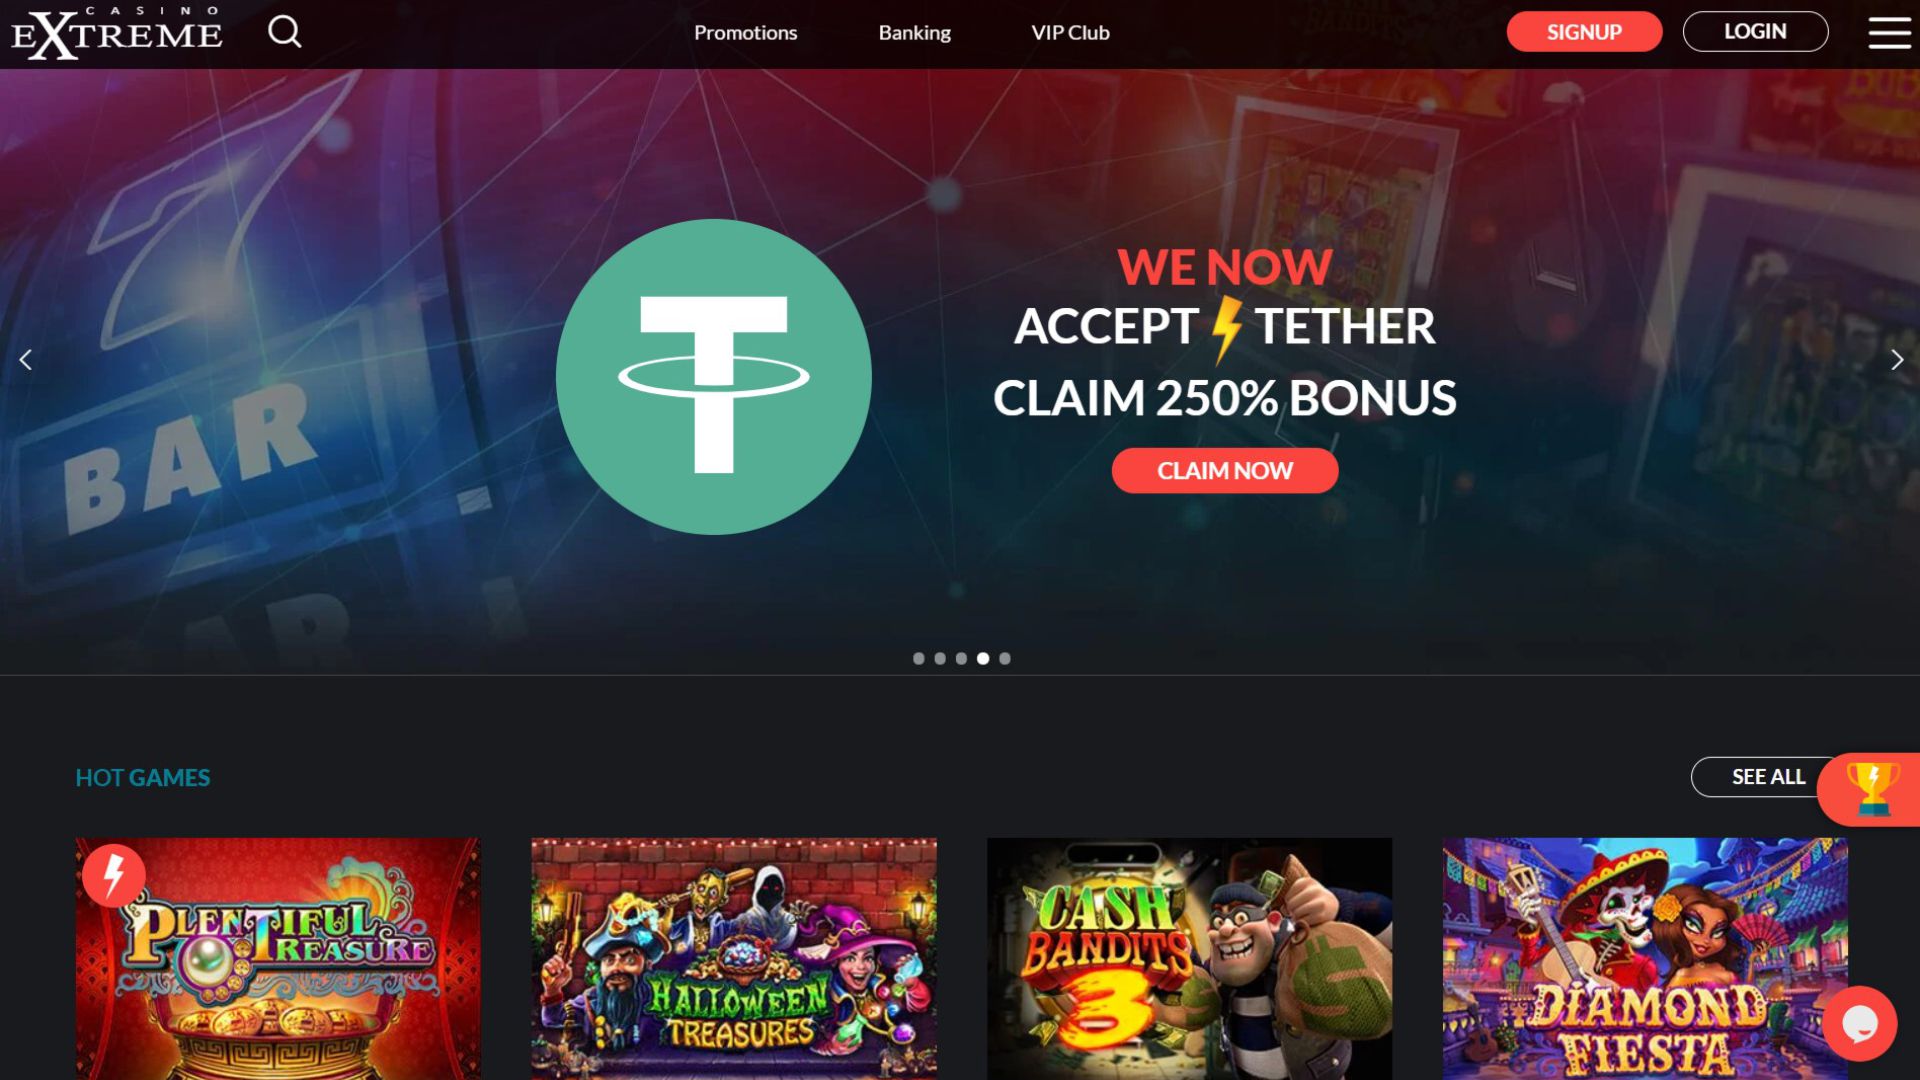 Casino Extreme Review Join Casino Extreme and get 50 Free Spins when